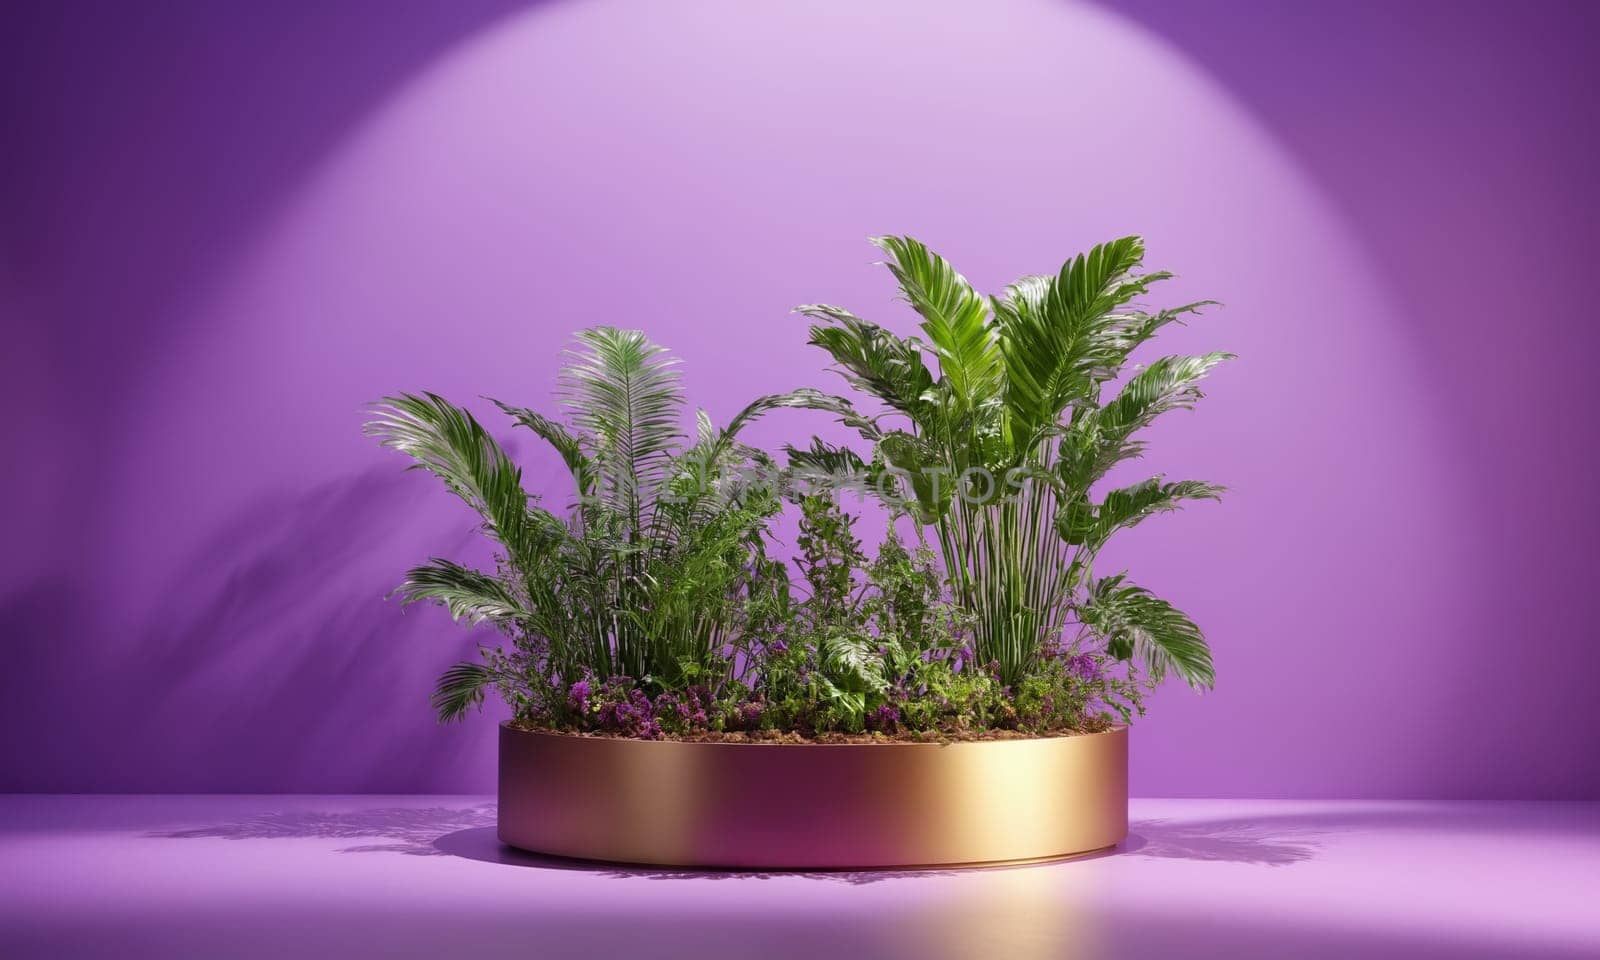 Unoccupied podium for product display with plants and shadows on purple background.